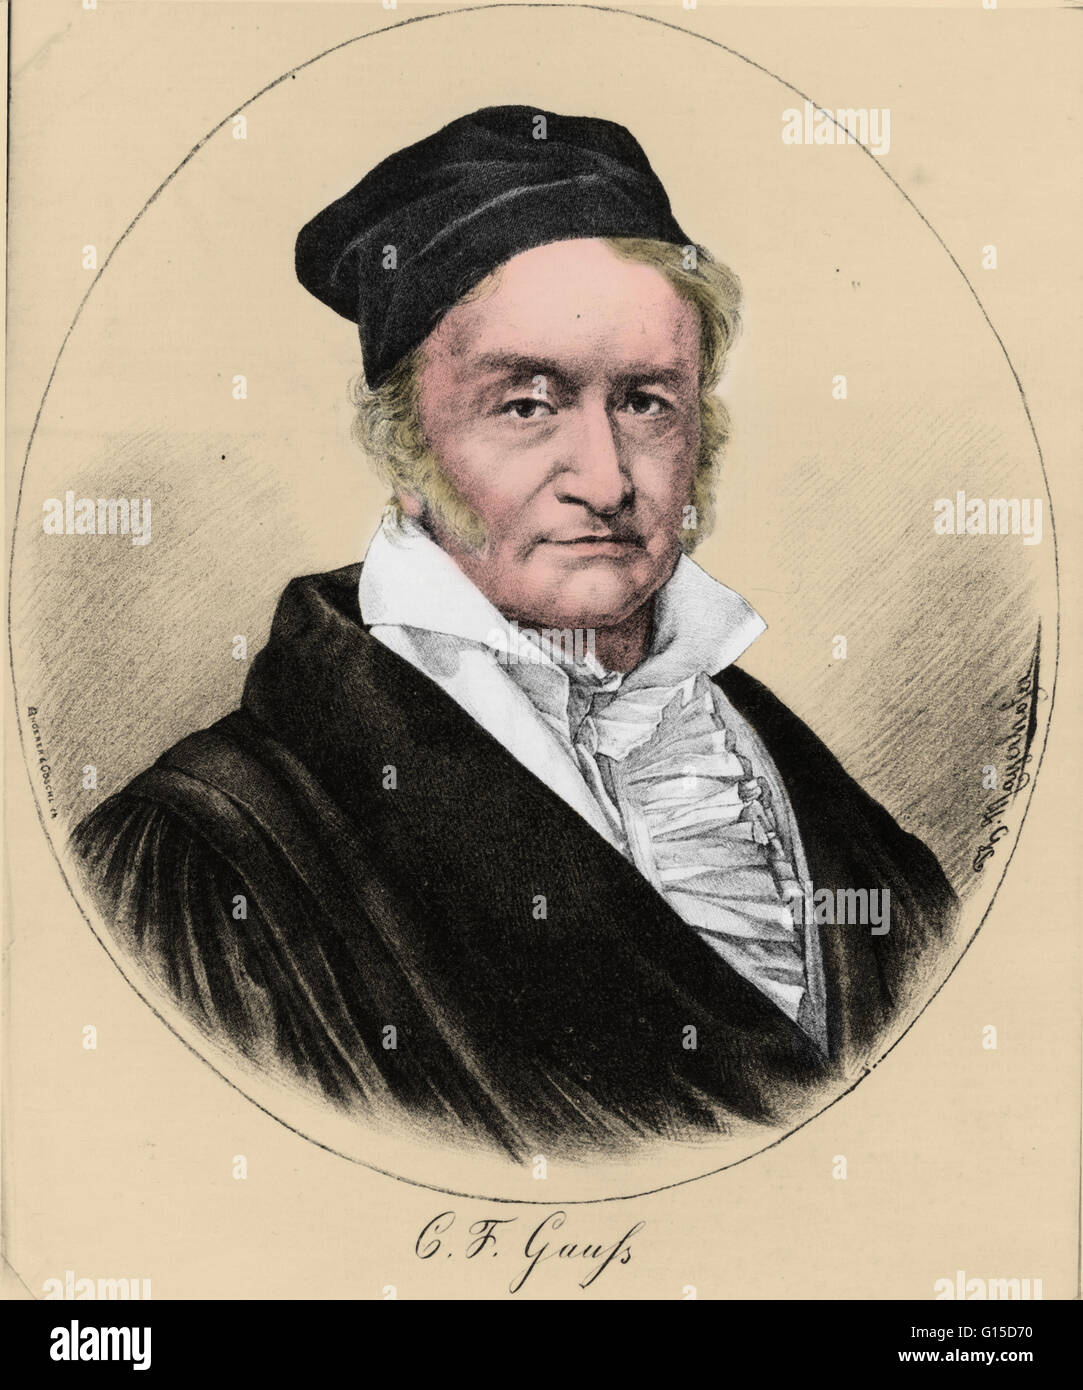 Johann Carl Friedrich Gauss (1777-1855) was a German mathematician and  scientist who contributed significantly to many fields, including number  theory, statistics, analysis, differential geometry, geodesy, geophysics,  electrostatics, astronomy and ...